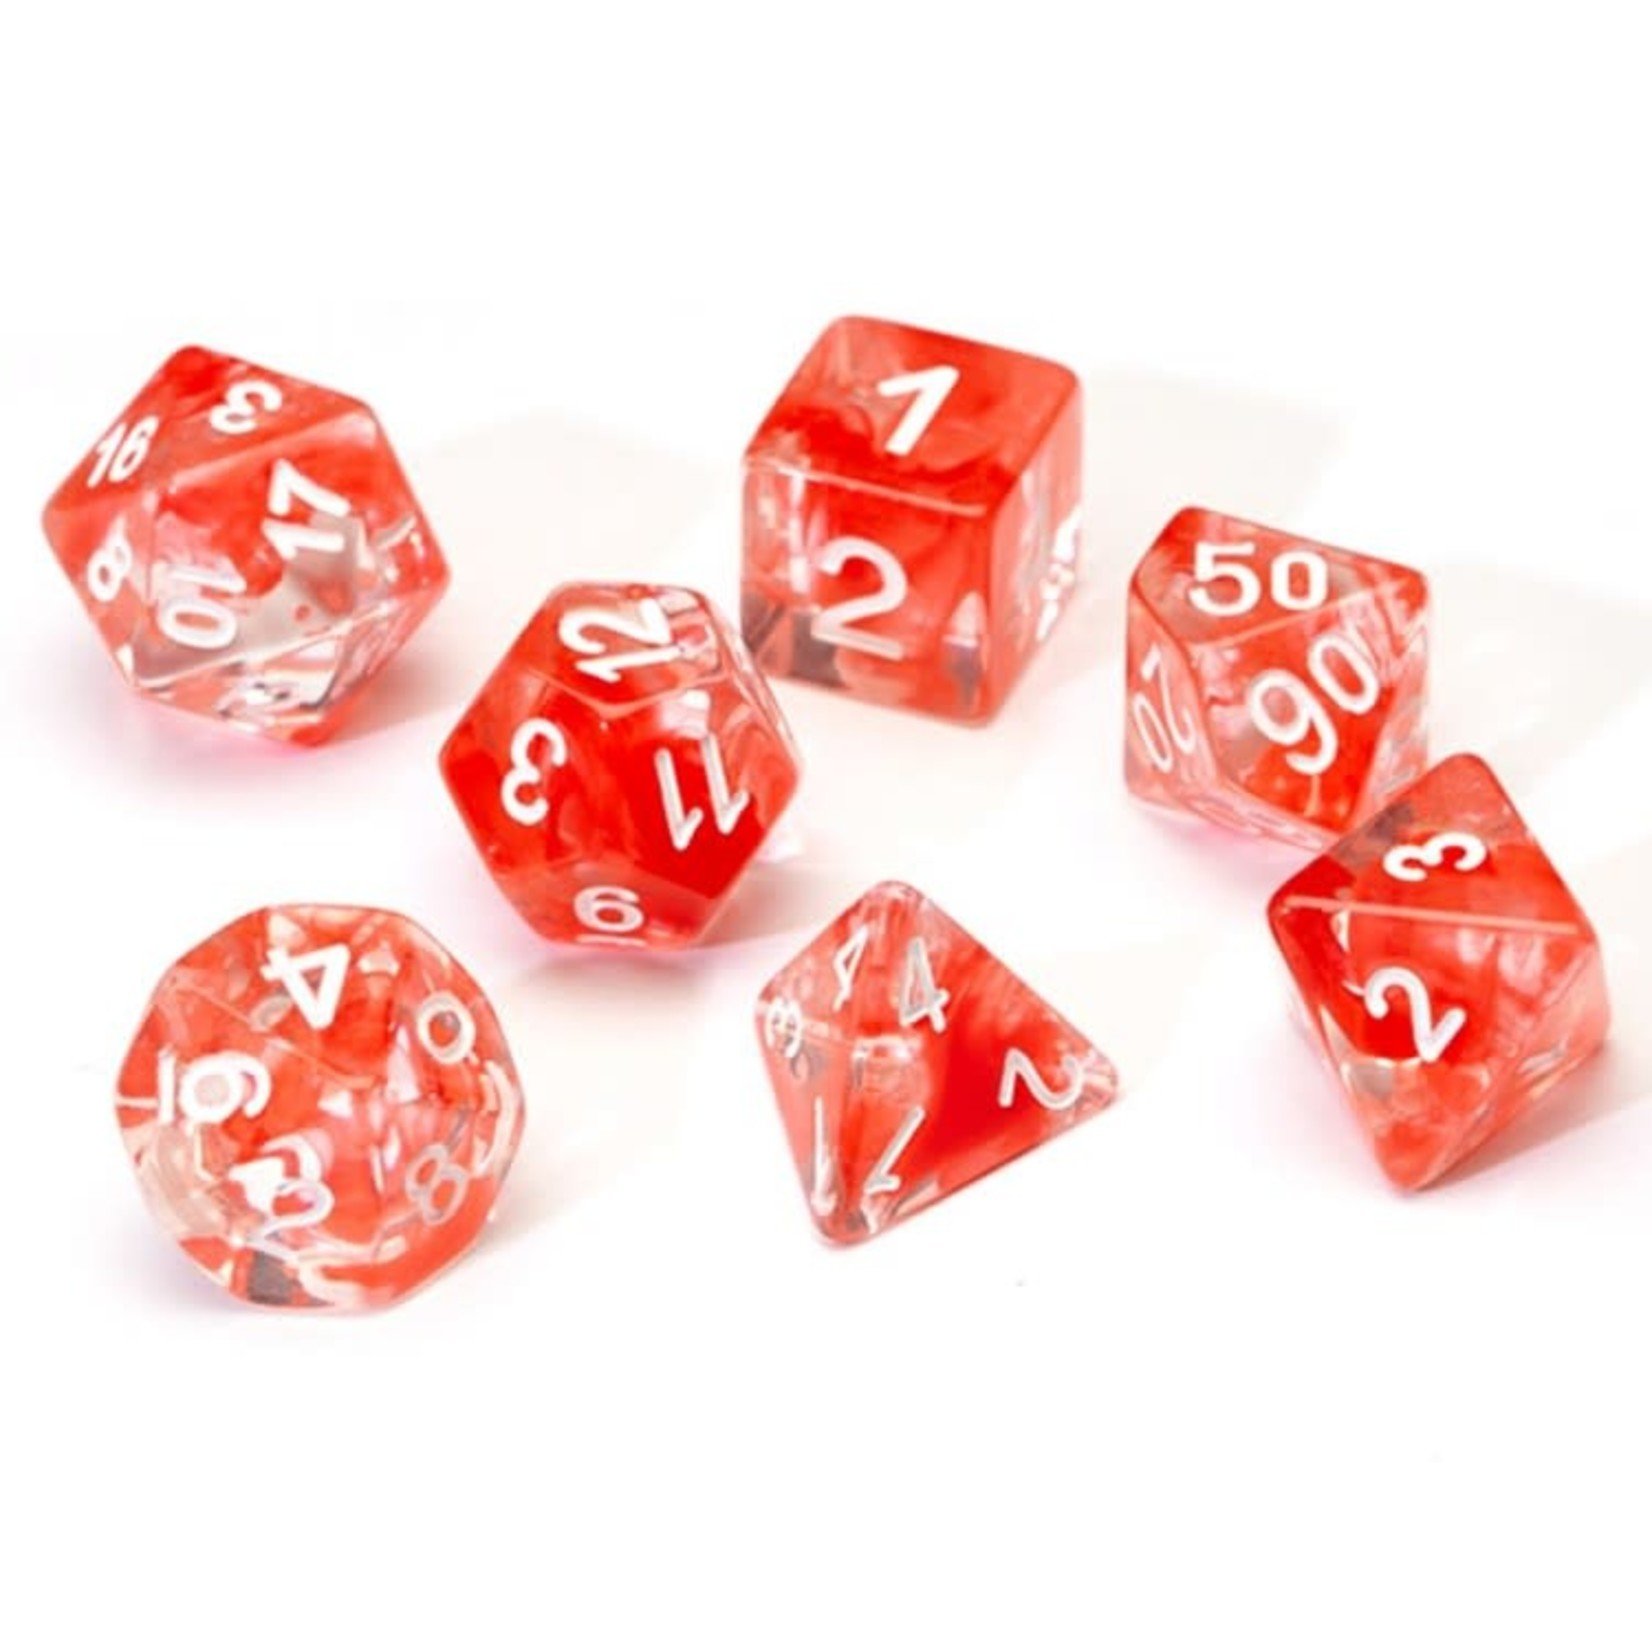 Sirius RPG Dice Red Cloud Transparent Red with White Polyhedral 8 die set